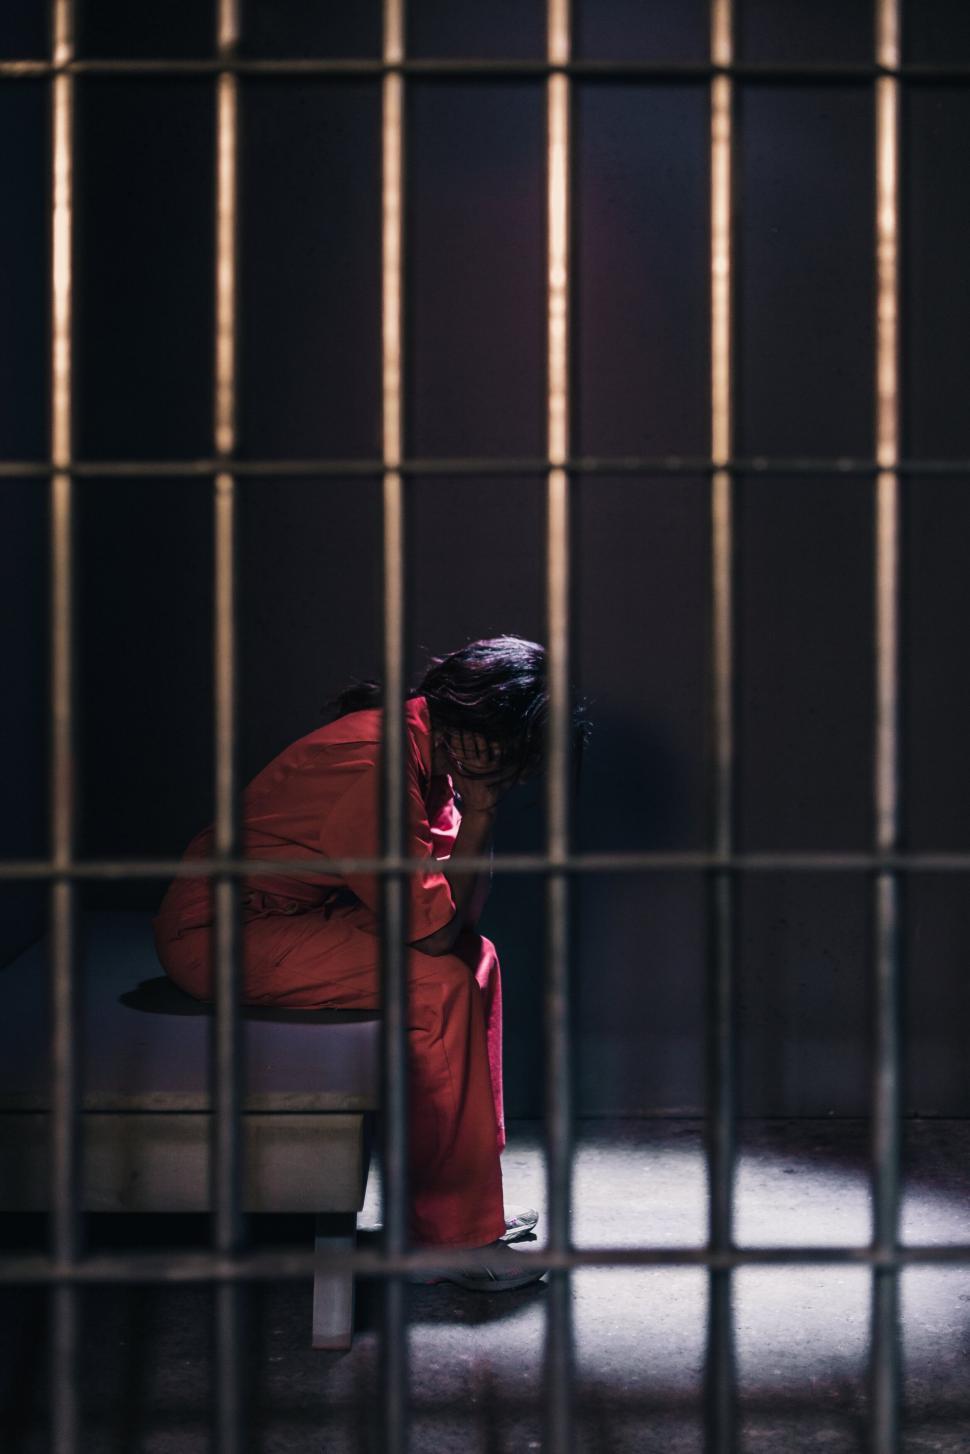 Free Image of Person caged in a prison cell, despair 